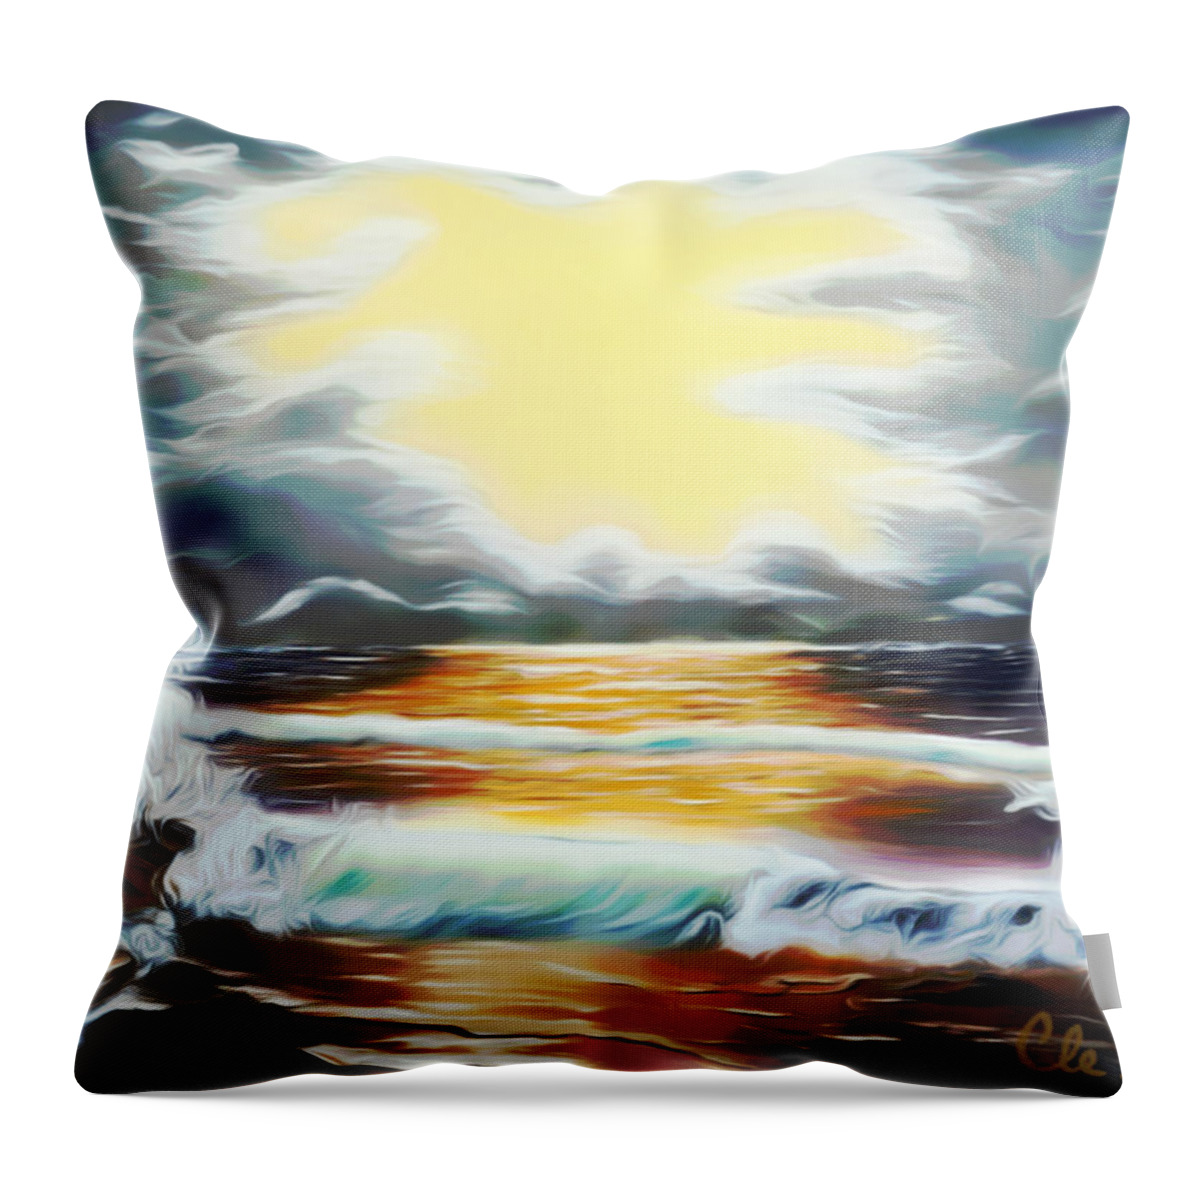 Sunset Throw Pillow featuring the painting Pacific Ocean Storm Dreamy Mirage by Claude Beaulac